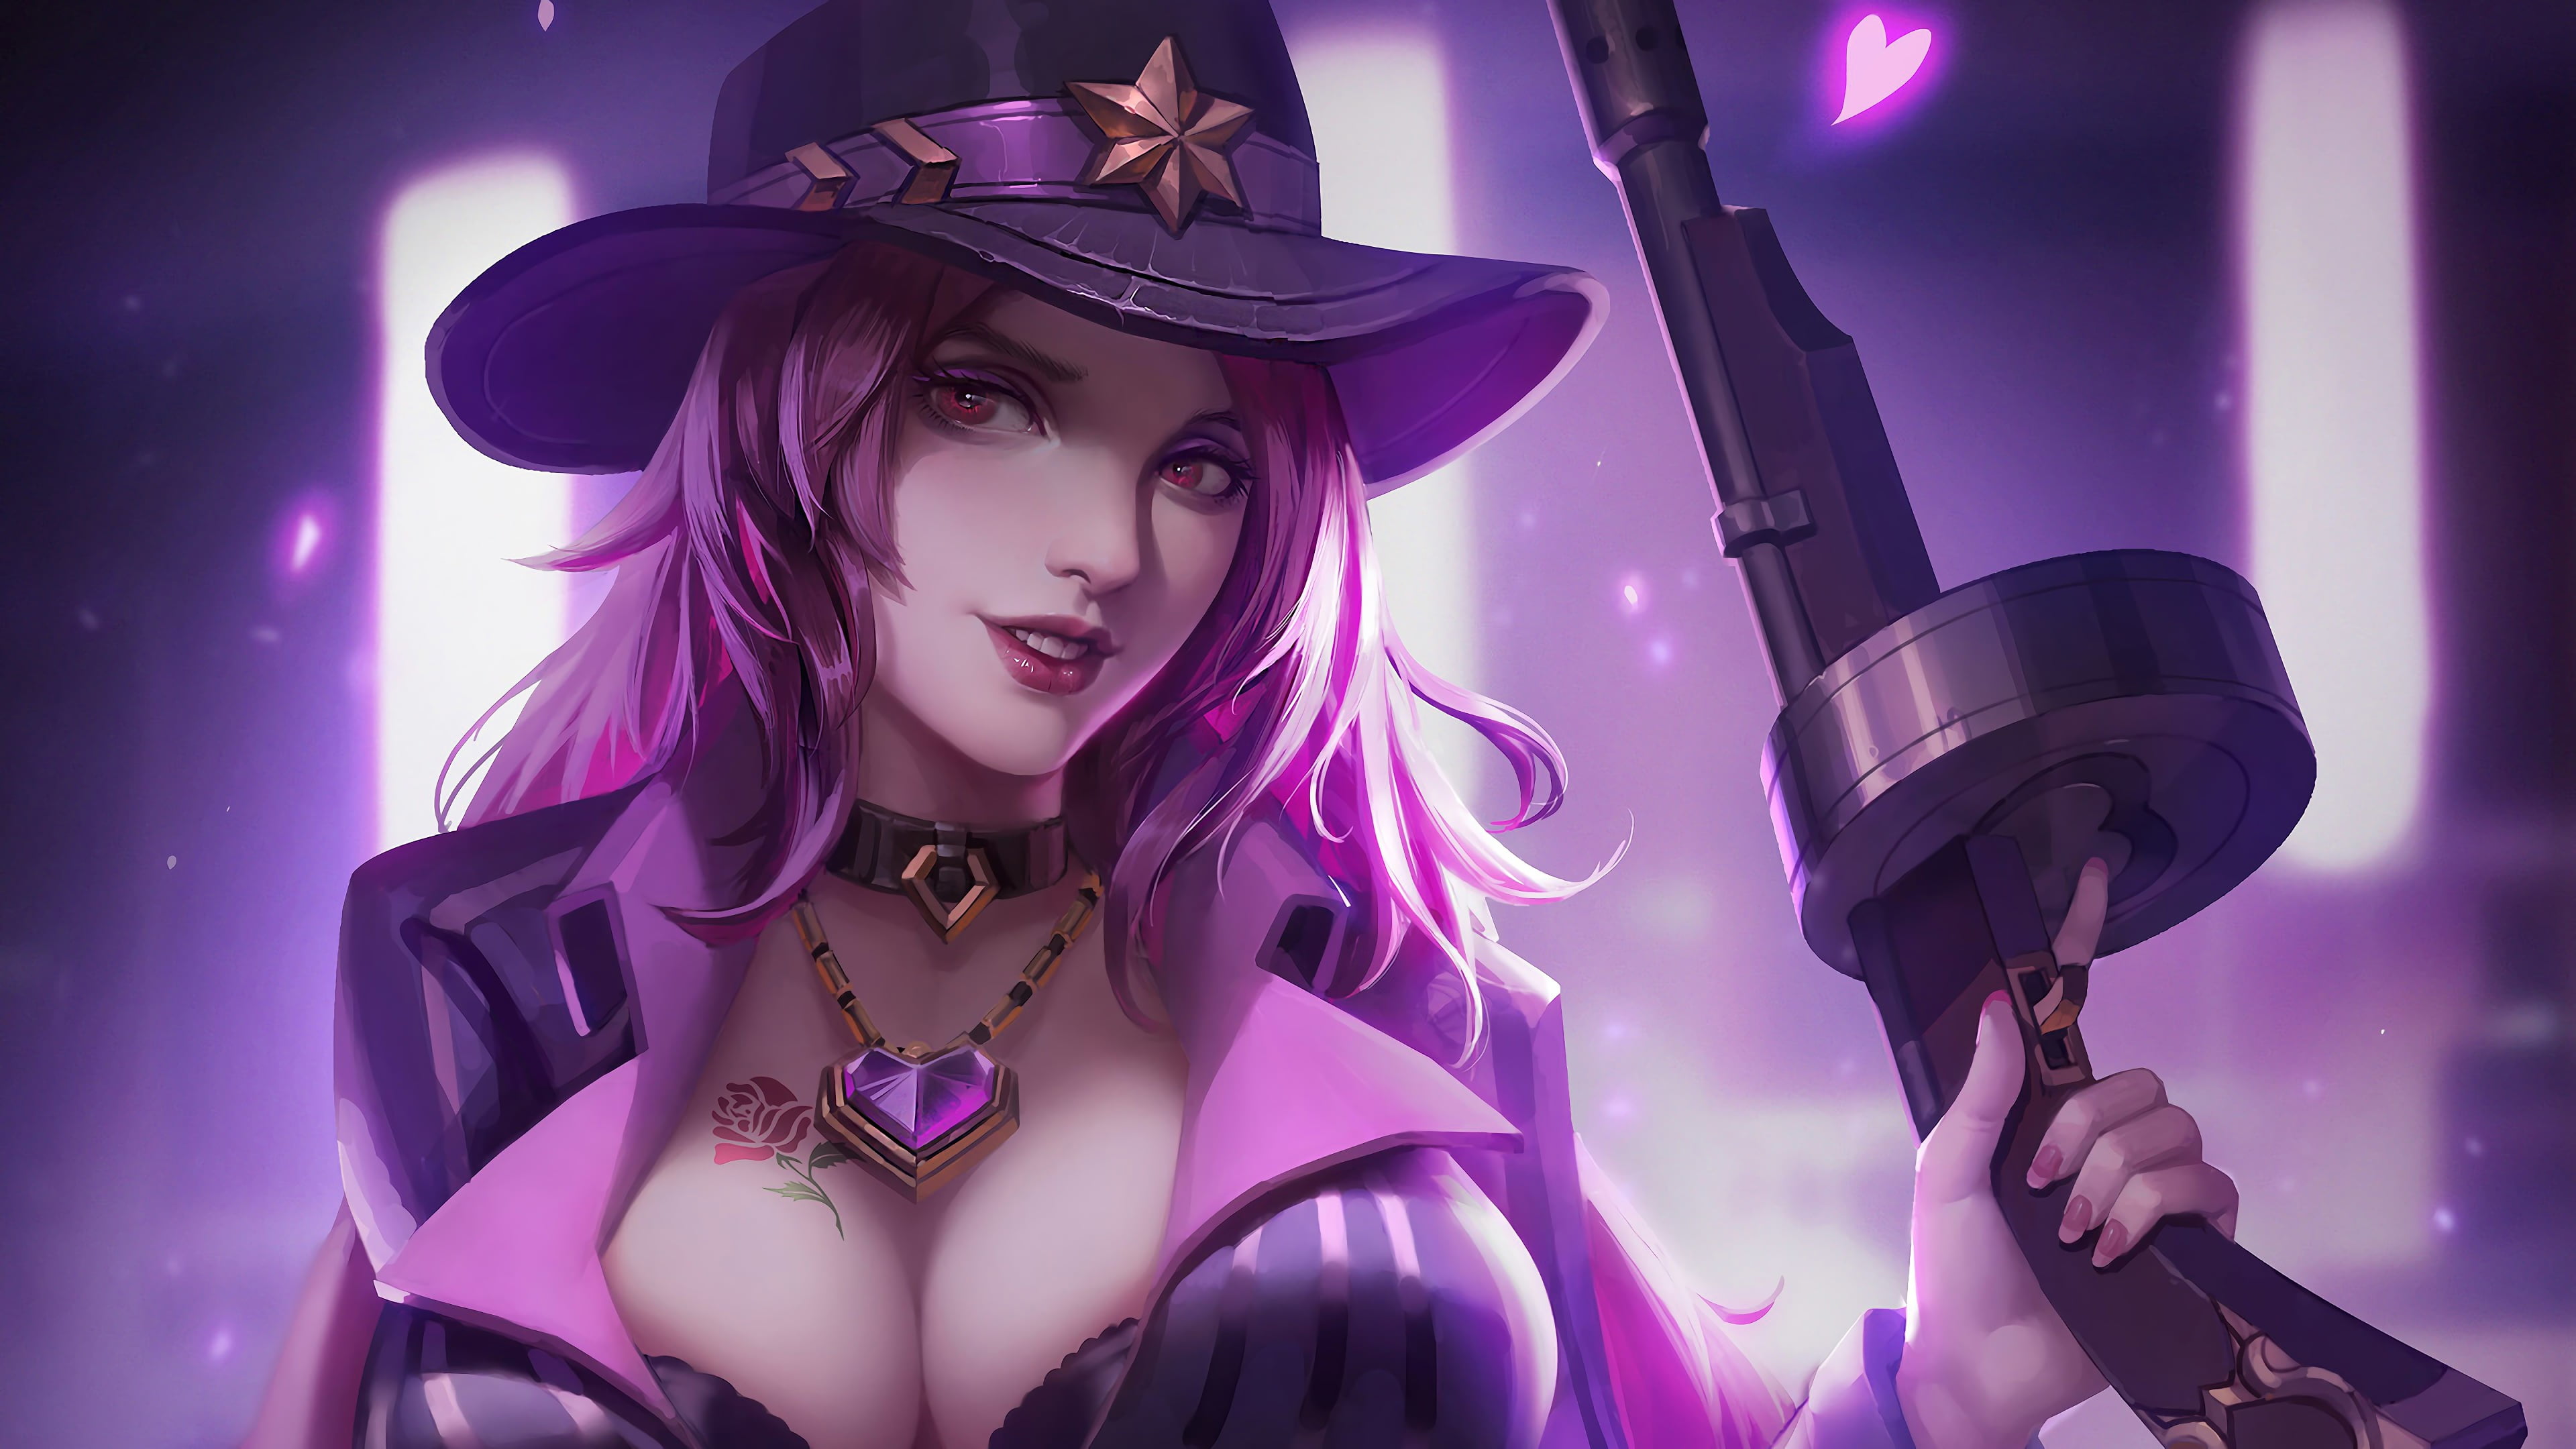 Free Download Hd Wallpaper League Of Legends Video Games Big Boobs Miss Fortune Miss